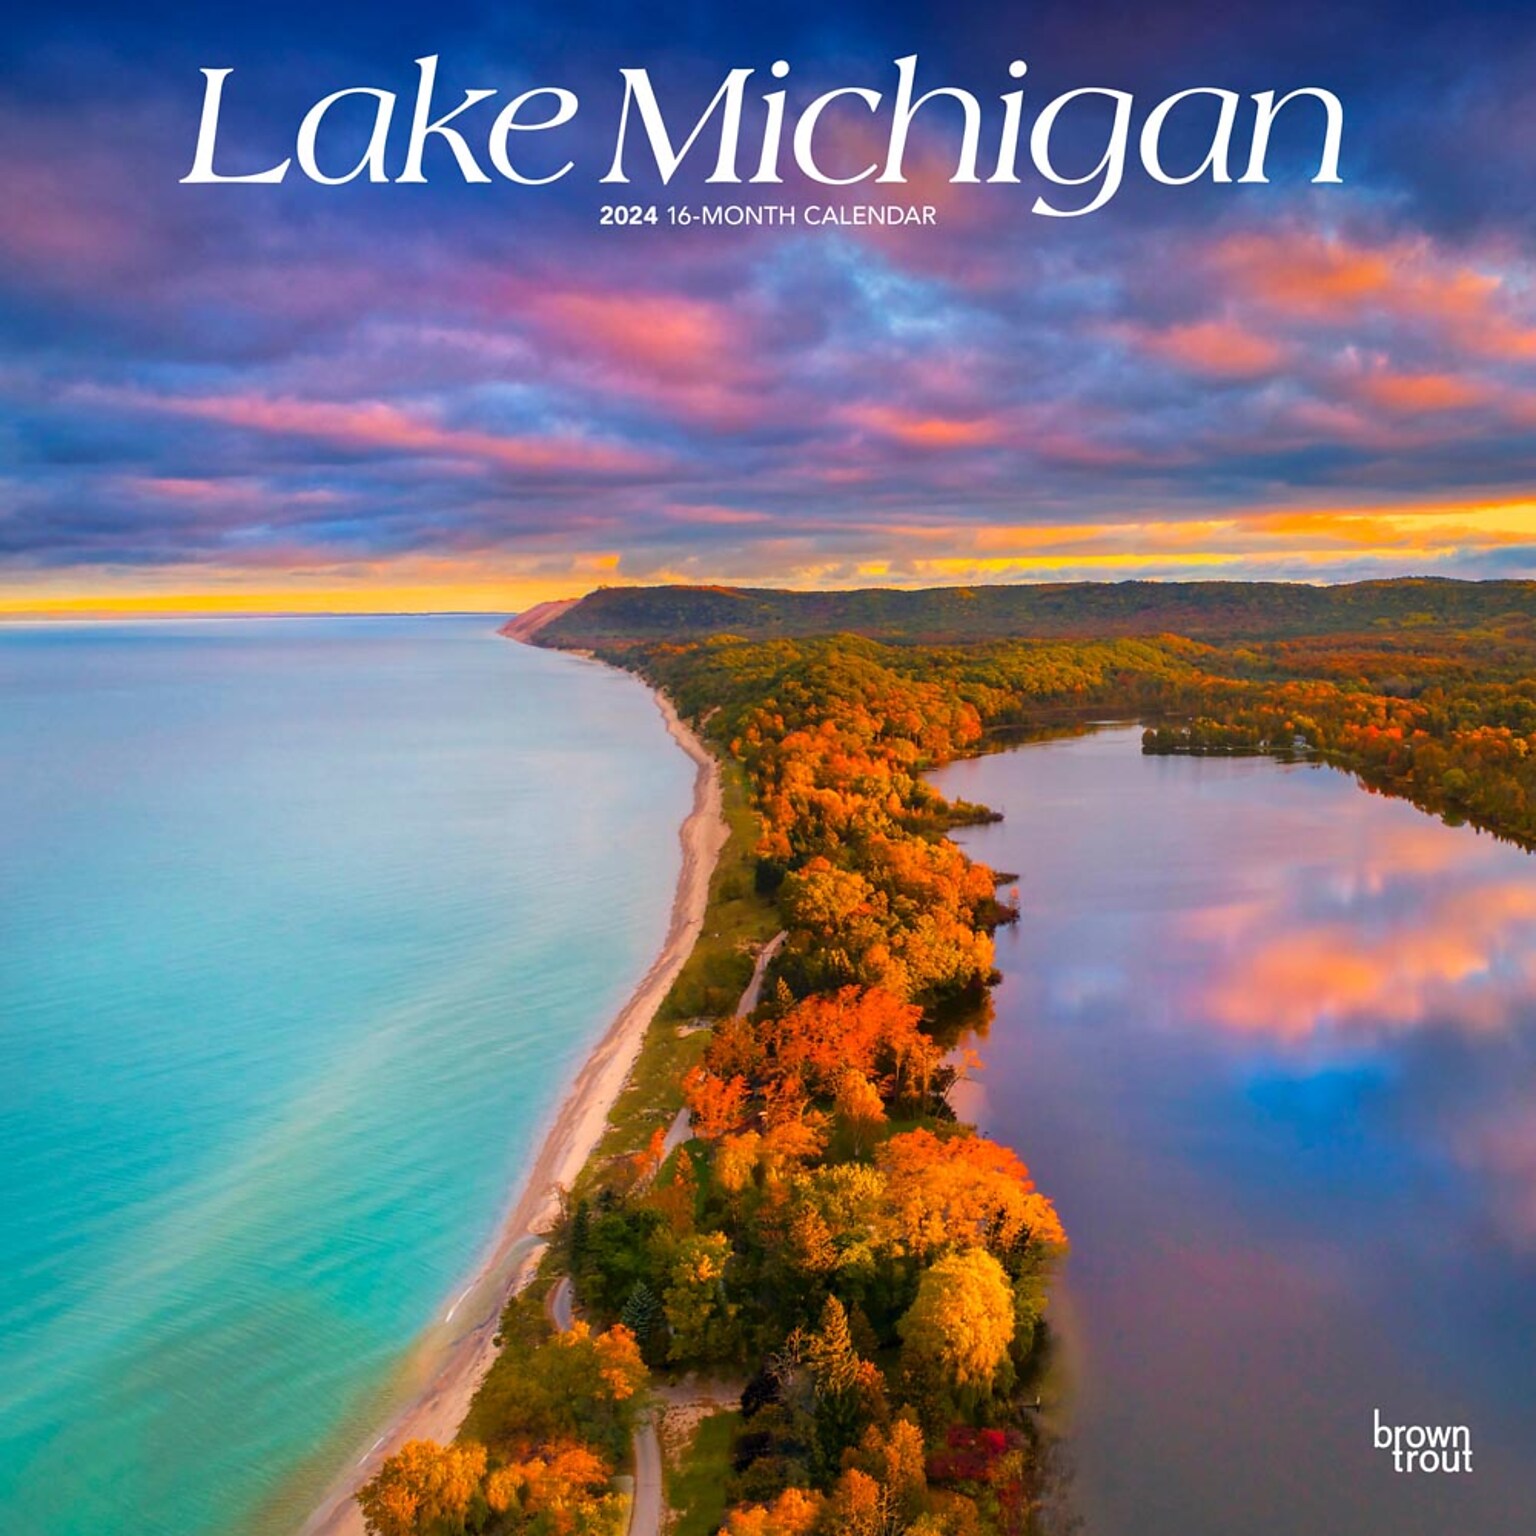 2024 BrownTrout Lake Michigan 12 x 24 Monthly Wall Calendar (9781975463632)